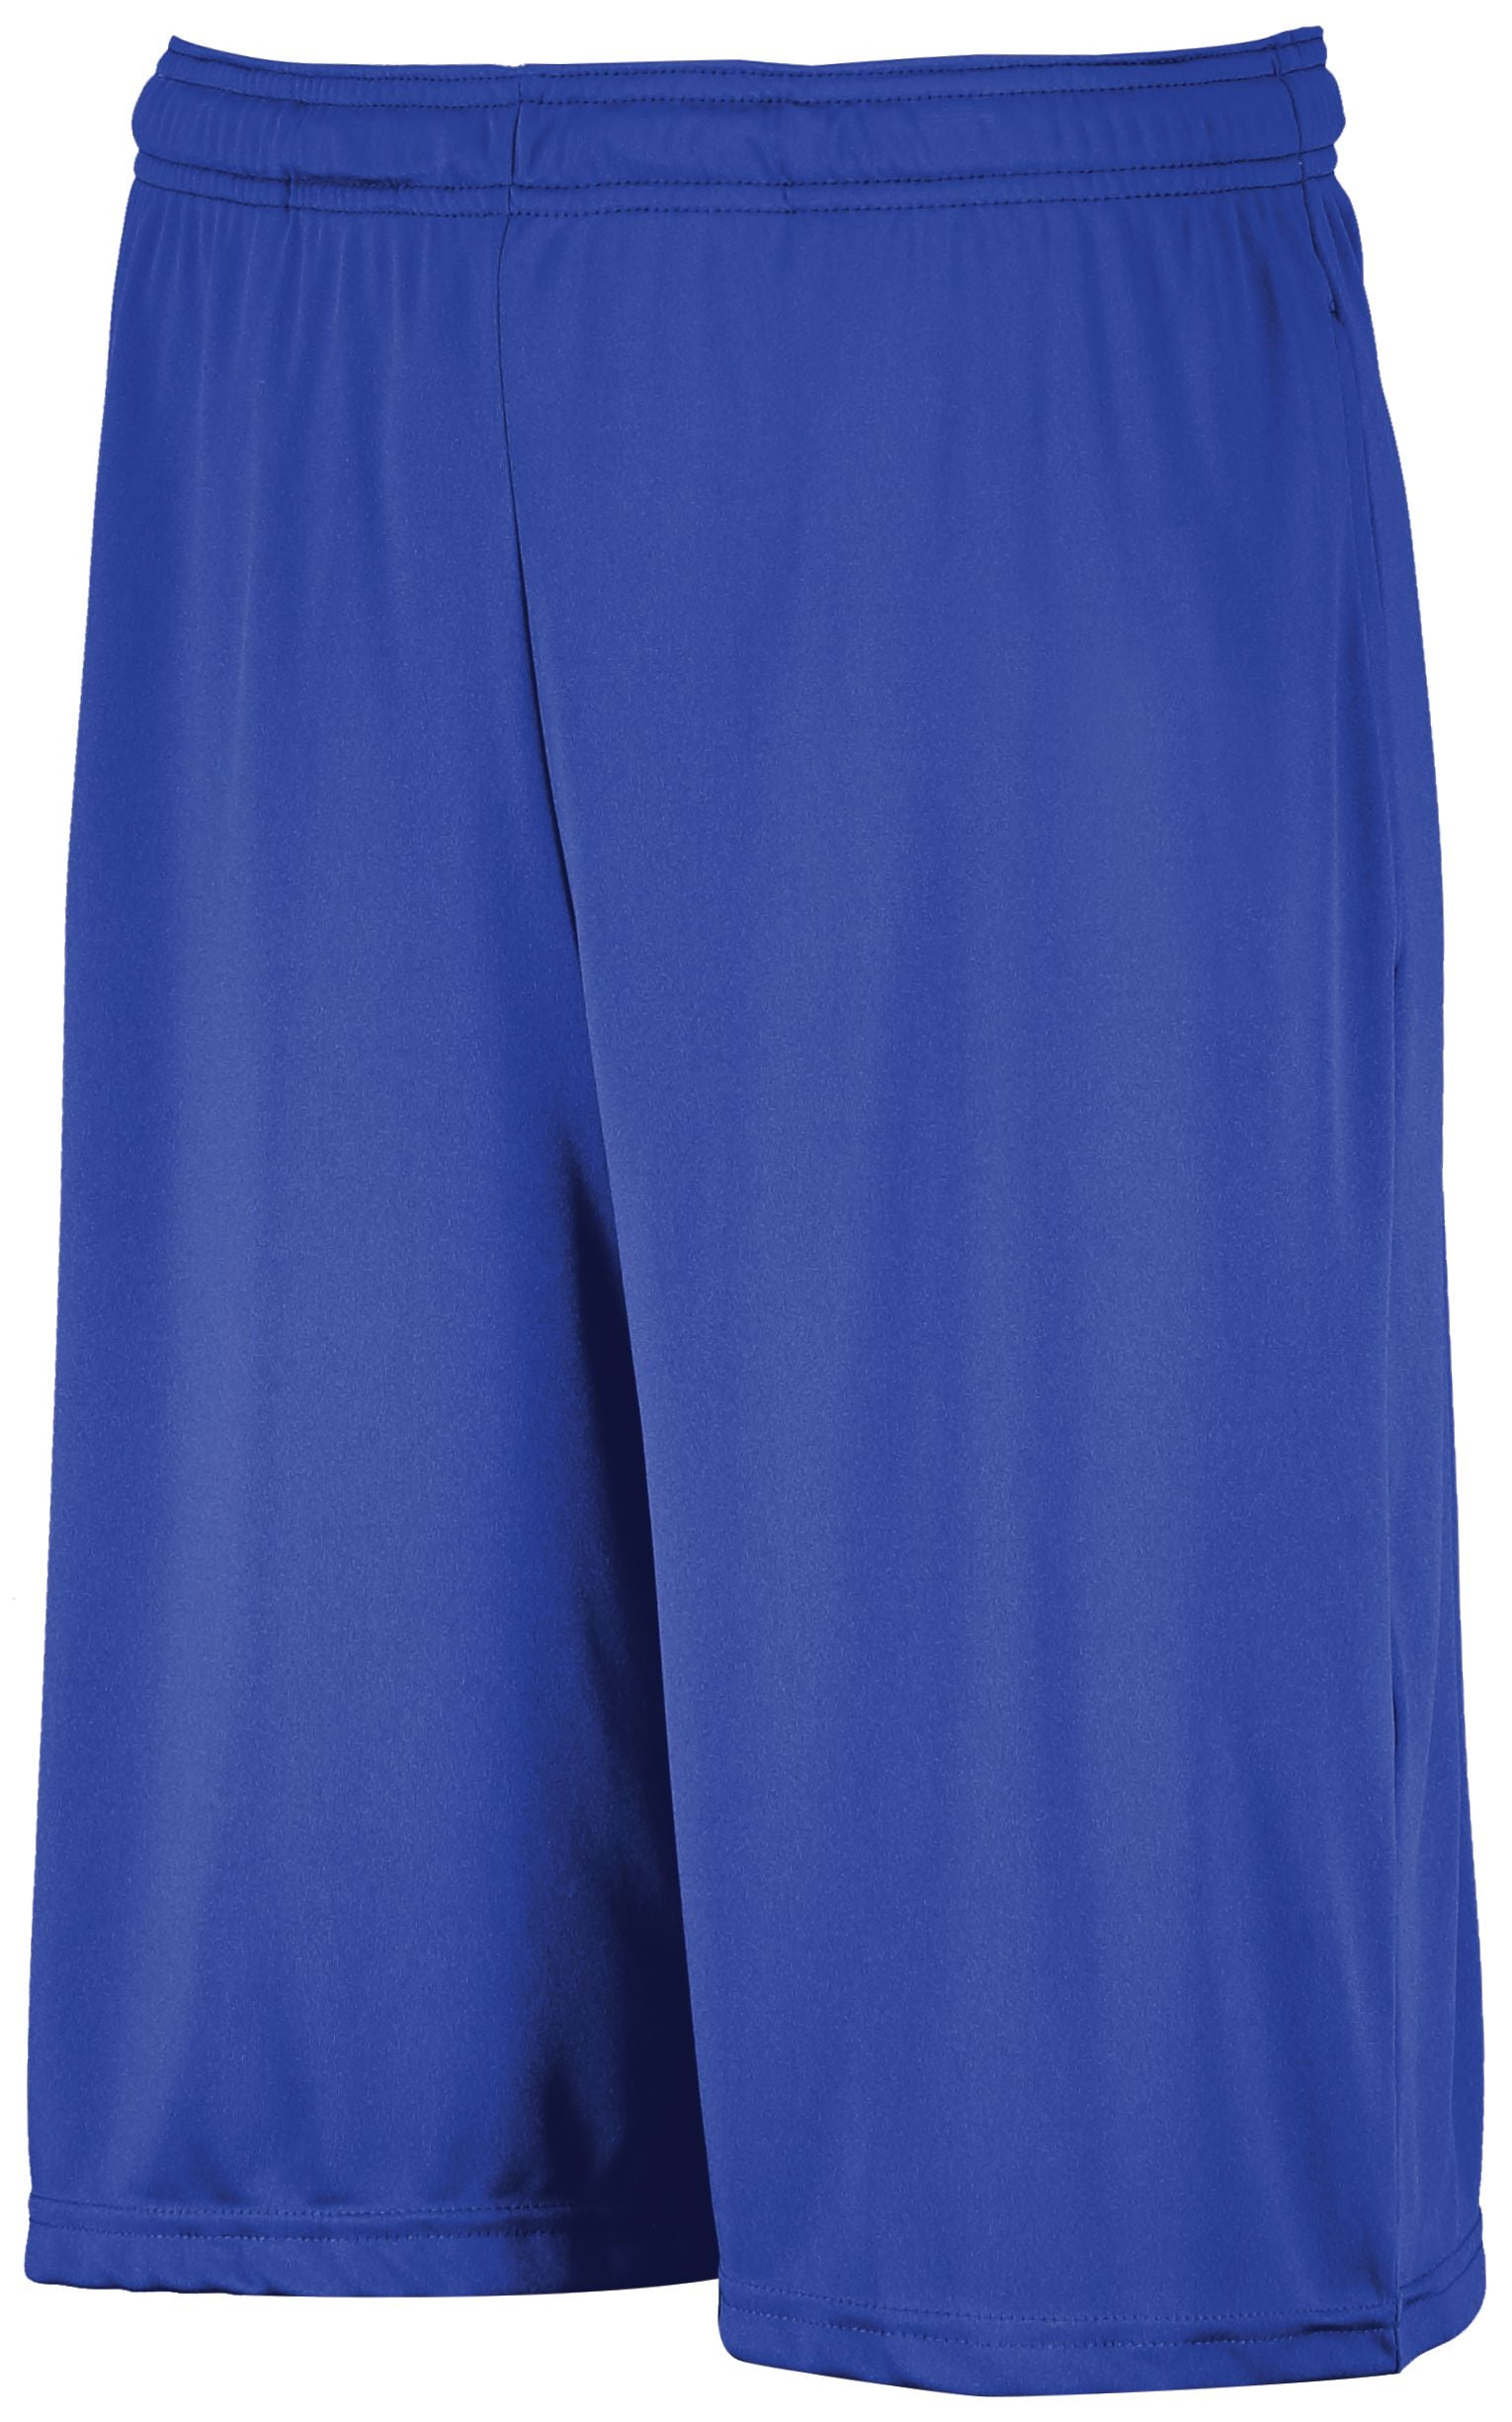 Russell Athletic Dri-Power Essential Performance Shorts With Pockets in Royal  -Part of the Adult, Adult-Shorts, Russell-Athletic-Products product lines at KanaleyCreations.com